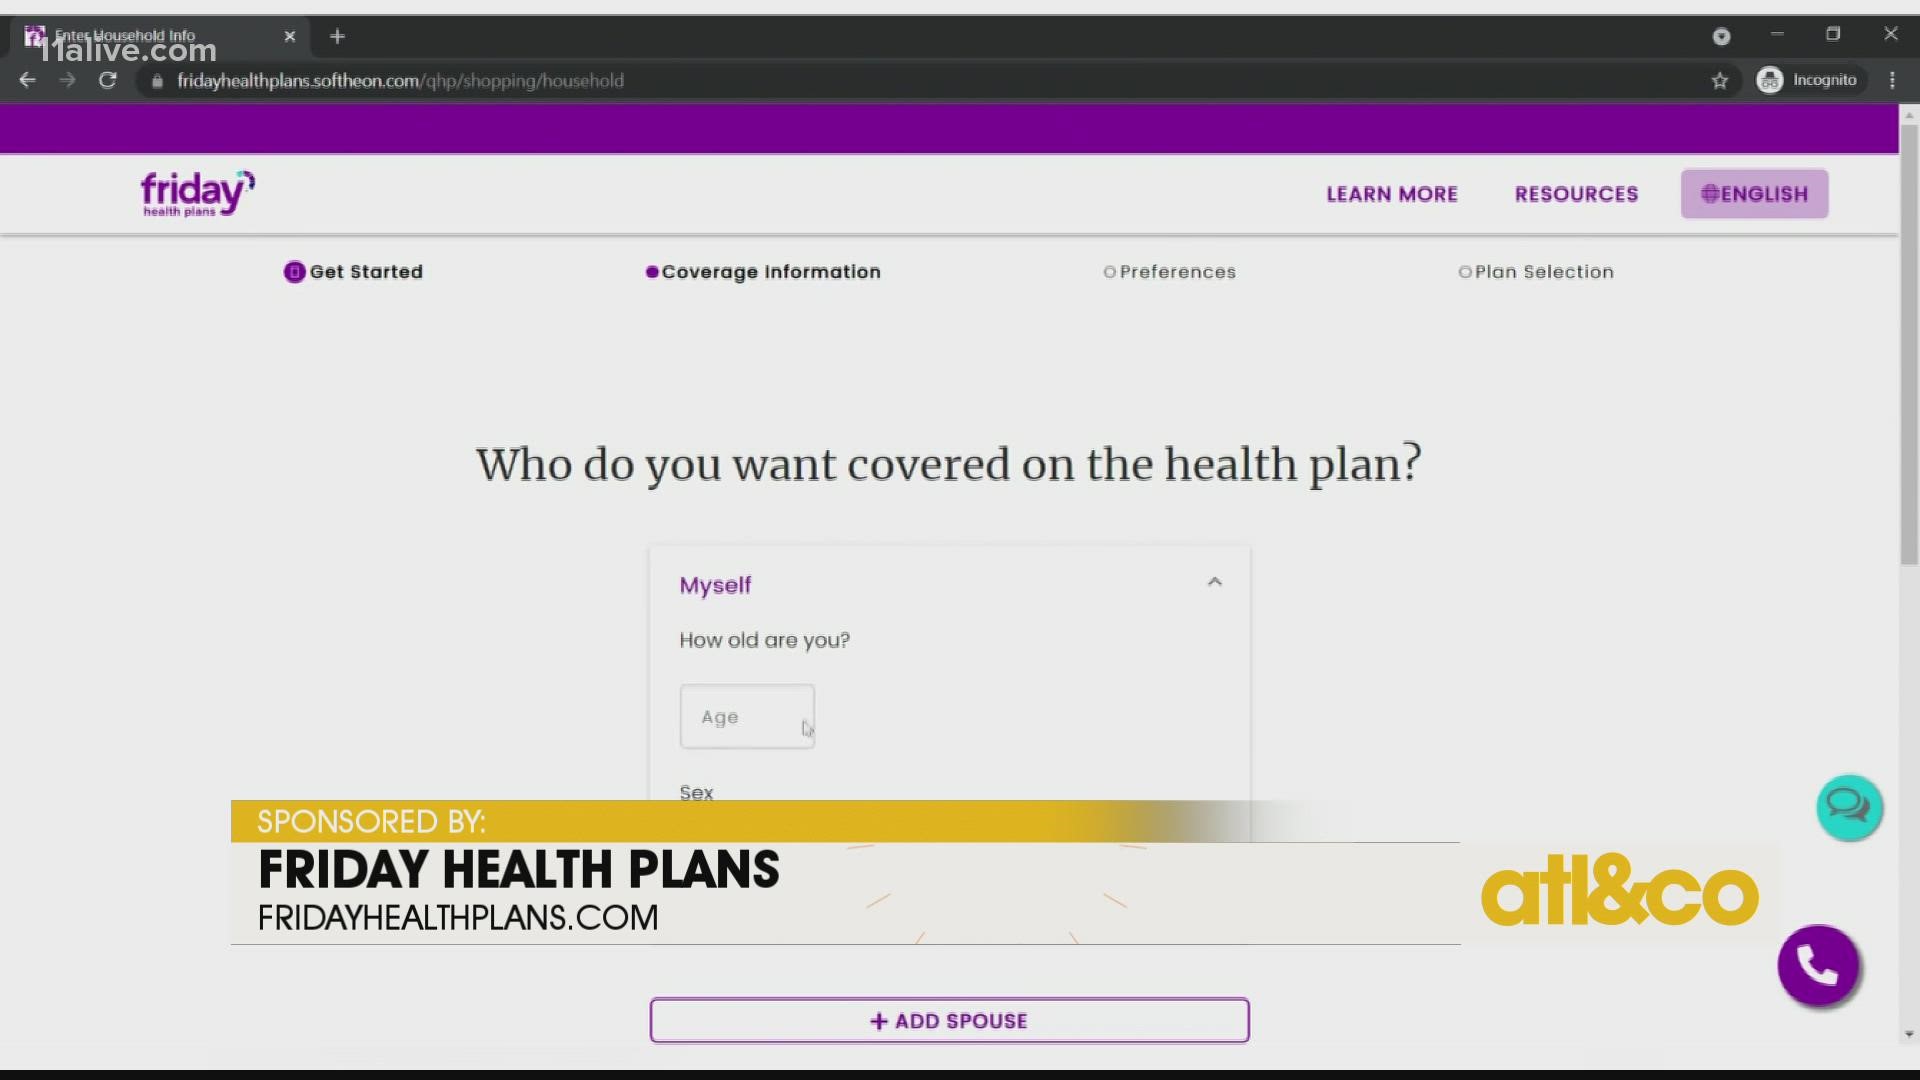 Make a change to your healthcare plan for the New Year! Friday Health Plans has helpful tips for your coverage.